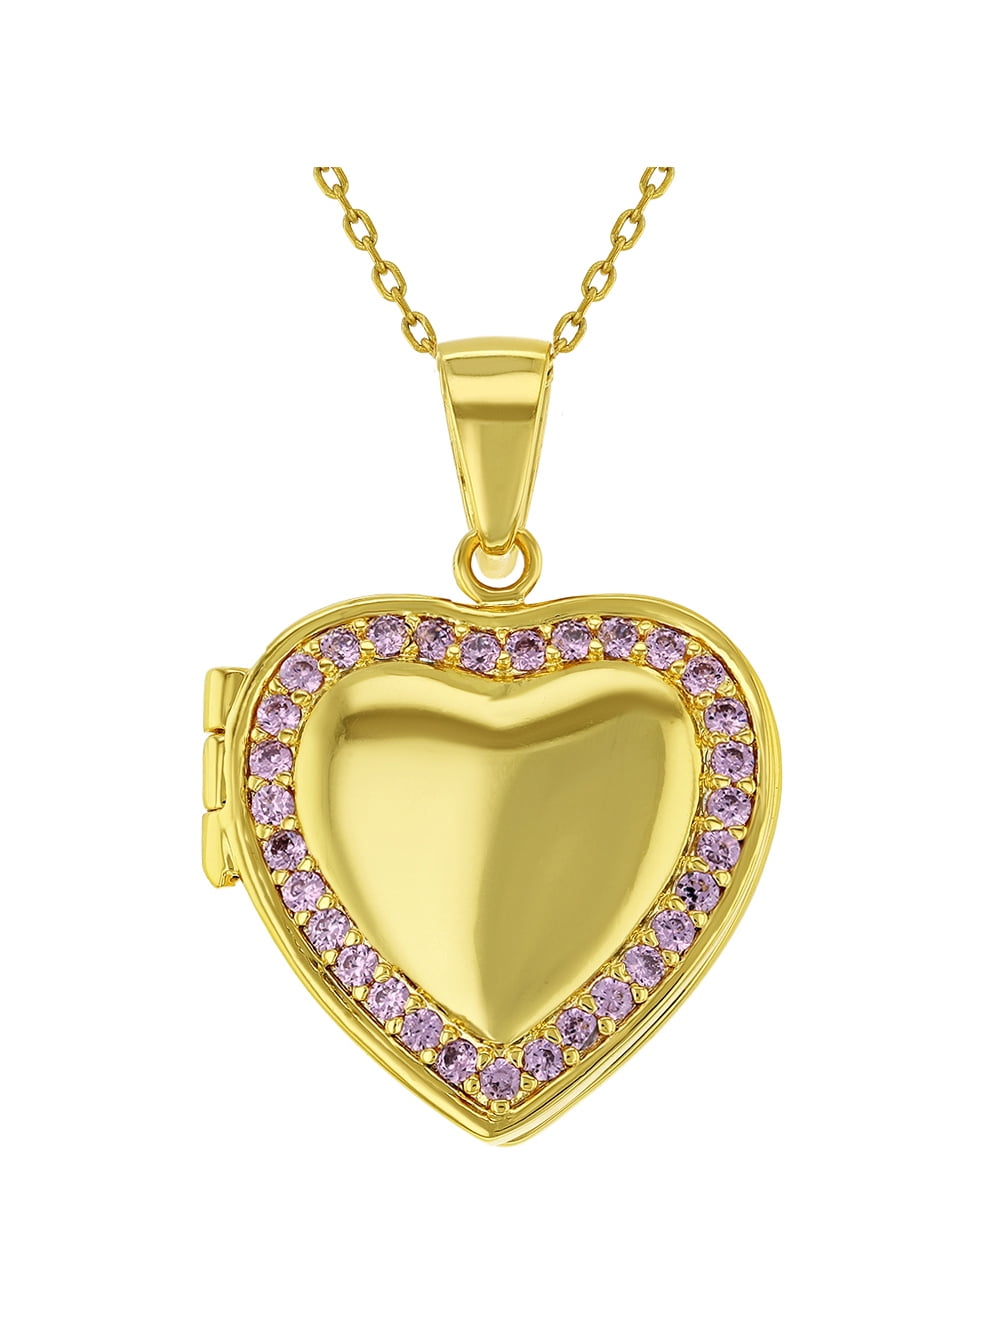 18K Gold Plated Heart Locket Pendant Necklace Photo 22" Link Chain 